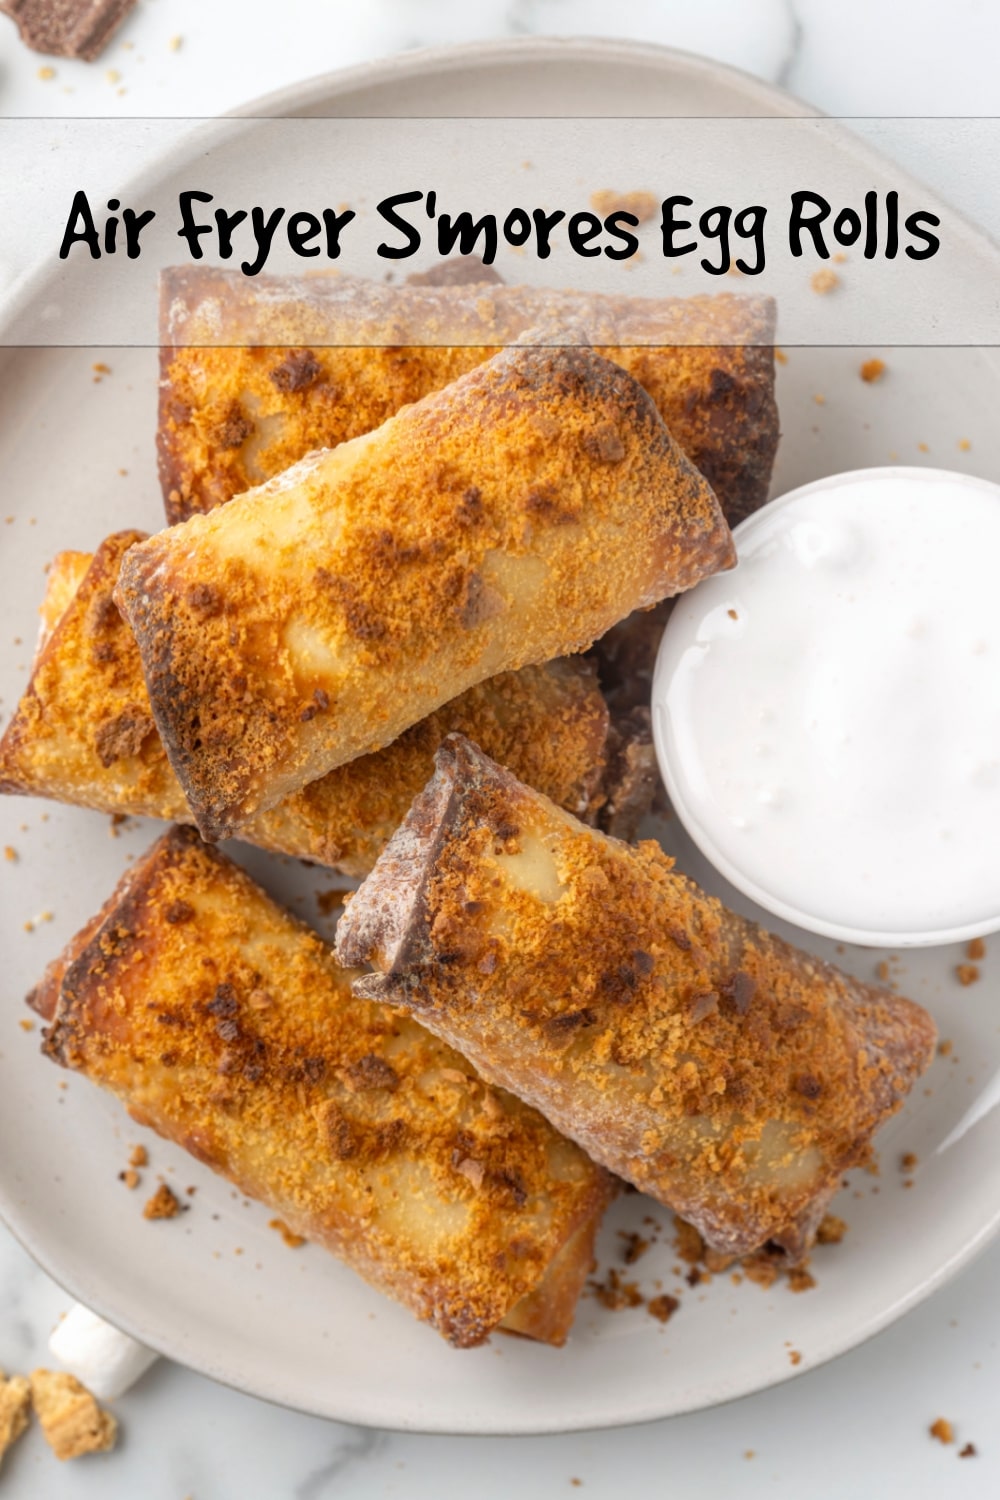 Air-fried and crispy on the outside, these s'mores egg rolls are filled with melted chocolate and marshmallows on the inside, with extra marshmallow fluff served on the outside to dunk into. The perfect twist on a campfire treat. via @cmpollak1